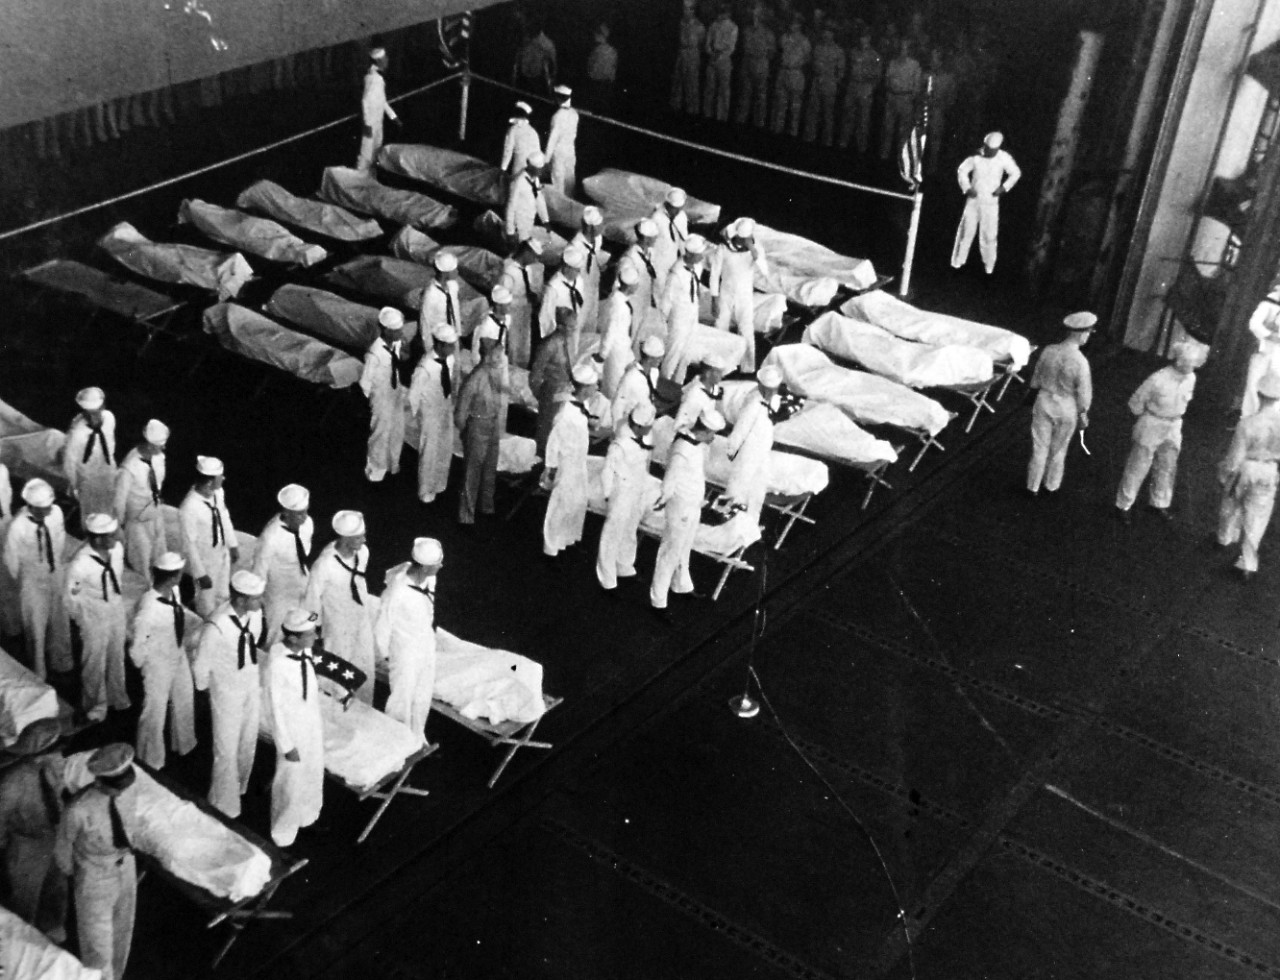 80-G-49693:  Burial at Sea, June 1945.   Navy casualties from a Kamikaze attack on an Essex-class carrier are buried at sea in a moving ceremony.  Released June 28, 1945.   Official U.S. Navy photograph, now in the collections of the National Archives.  